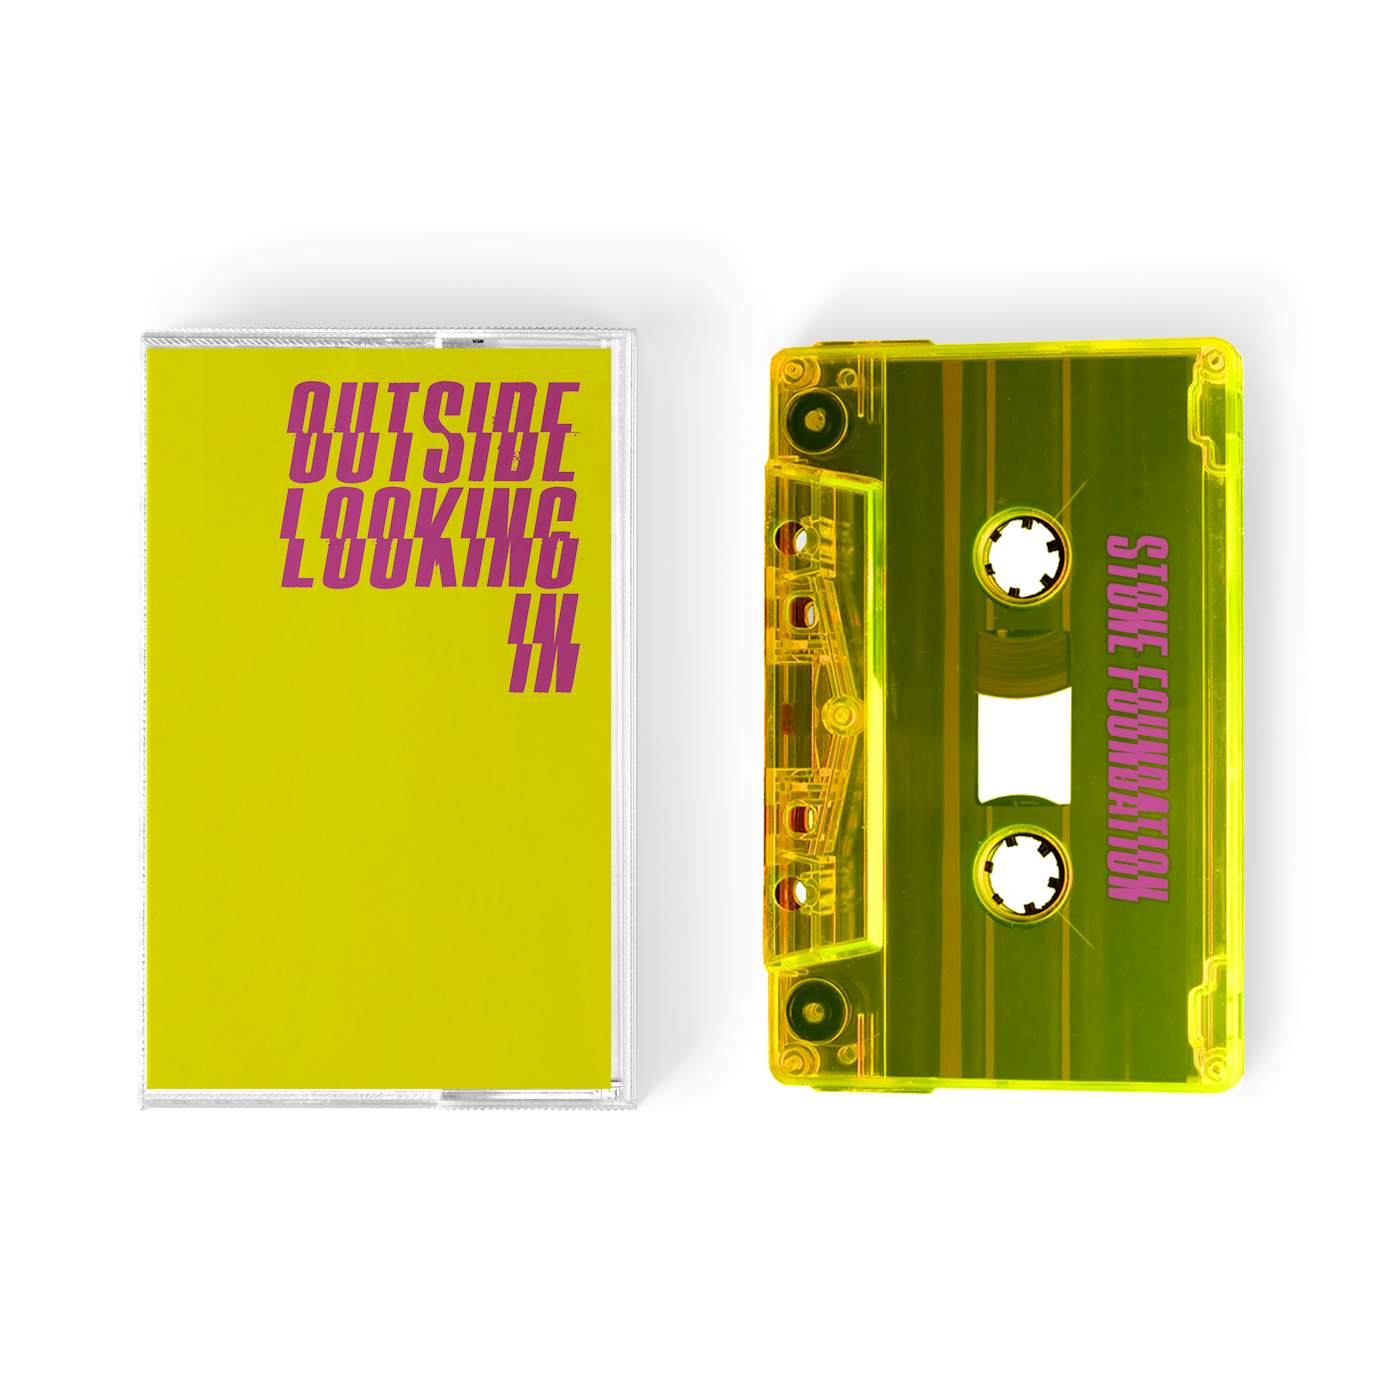 Stone Foundation Outside Looking In - Collector's Edition Yellow Cassette